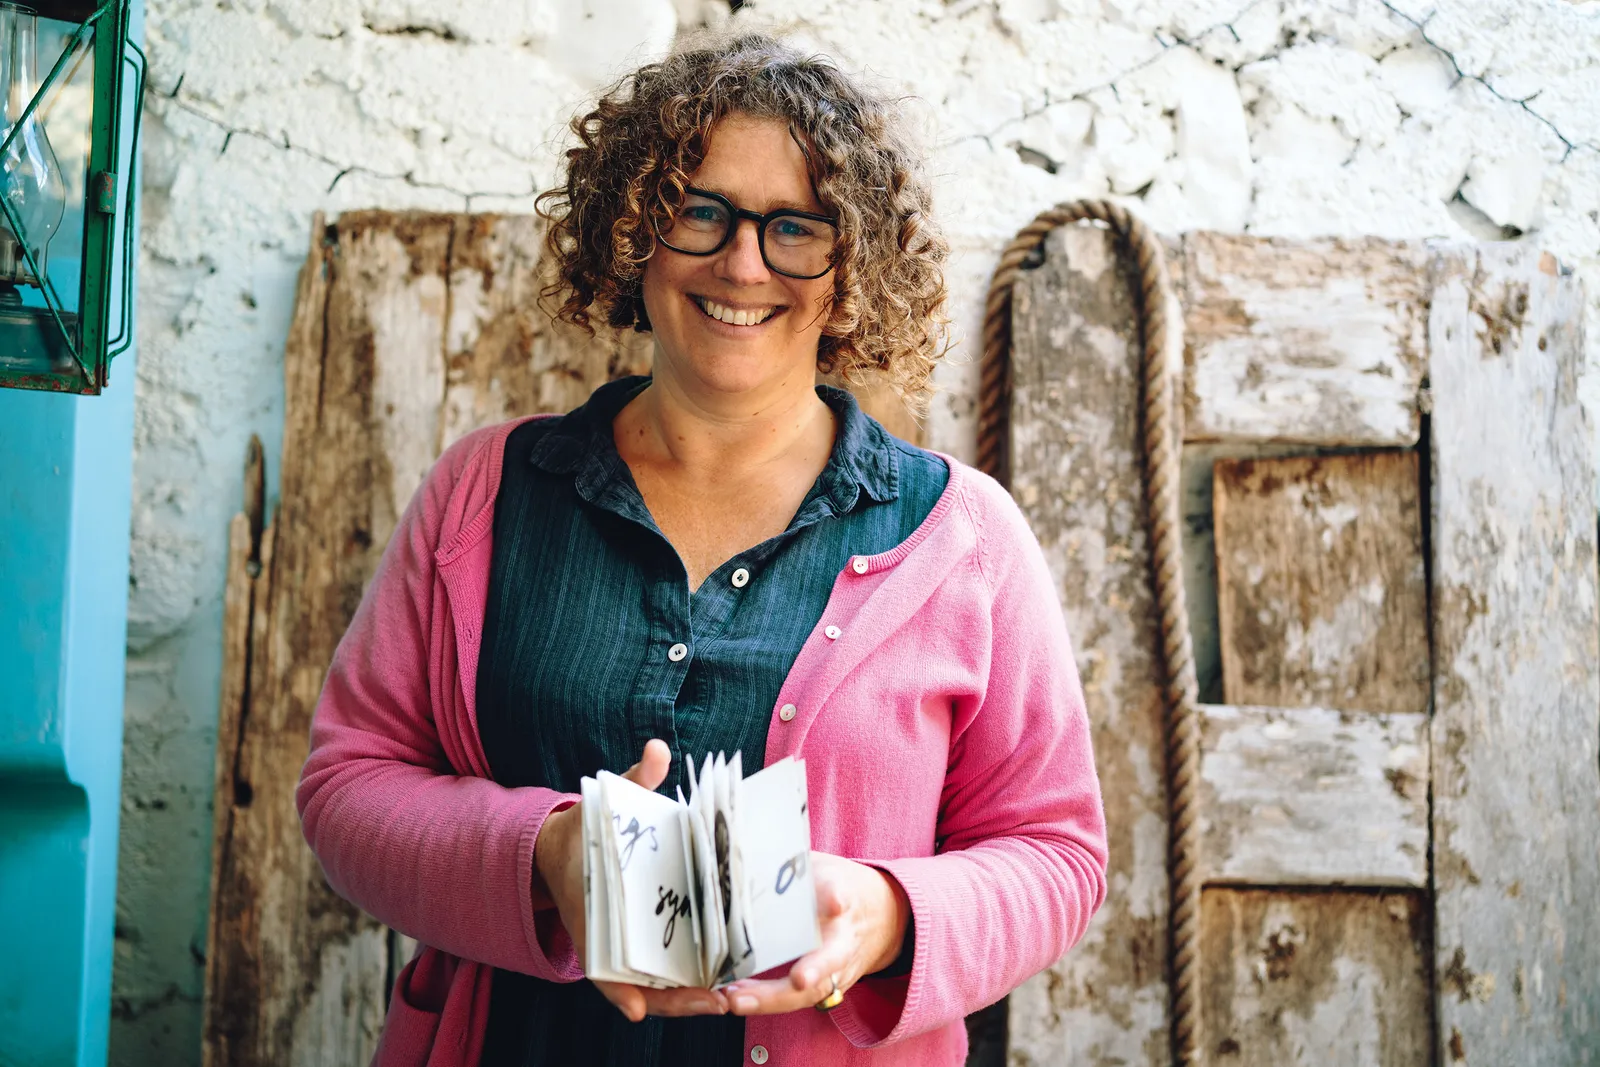 The woman who practices the traditional craft of bookbinding traverses the globe.